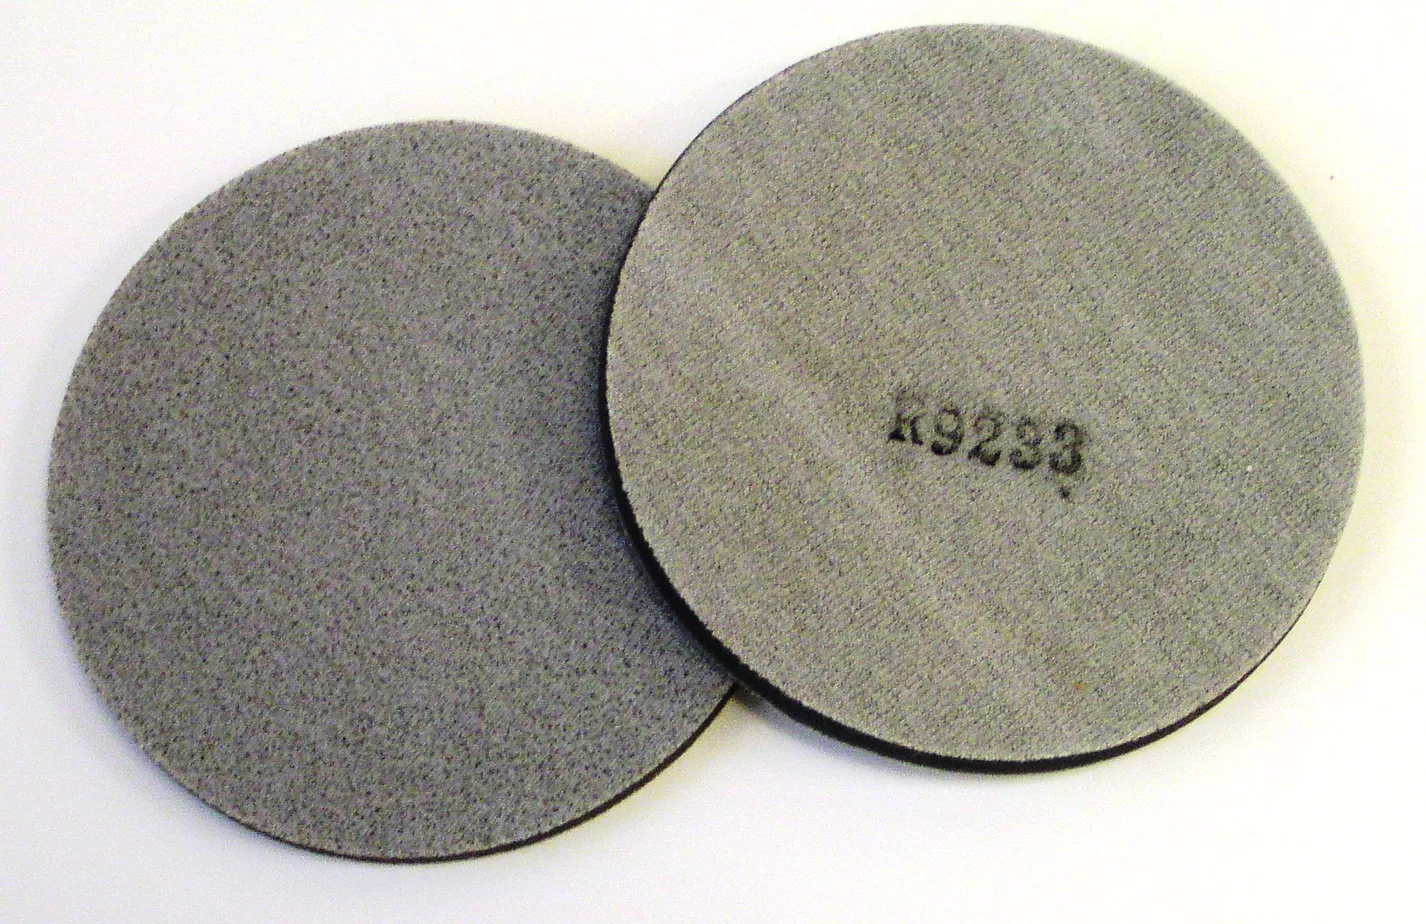 3M™ Stikit™ Soft Interface Disc Pad 02795, 5 in x 1/2 in, 25/Bag, 100
ea/Case